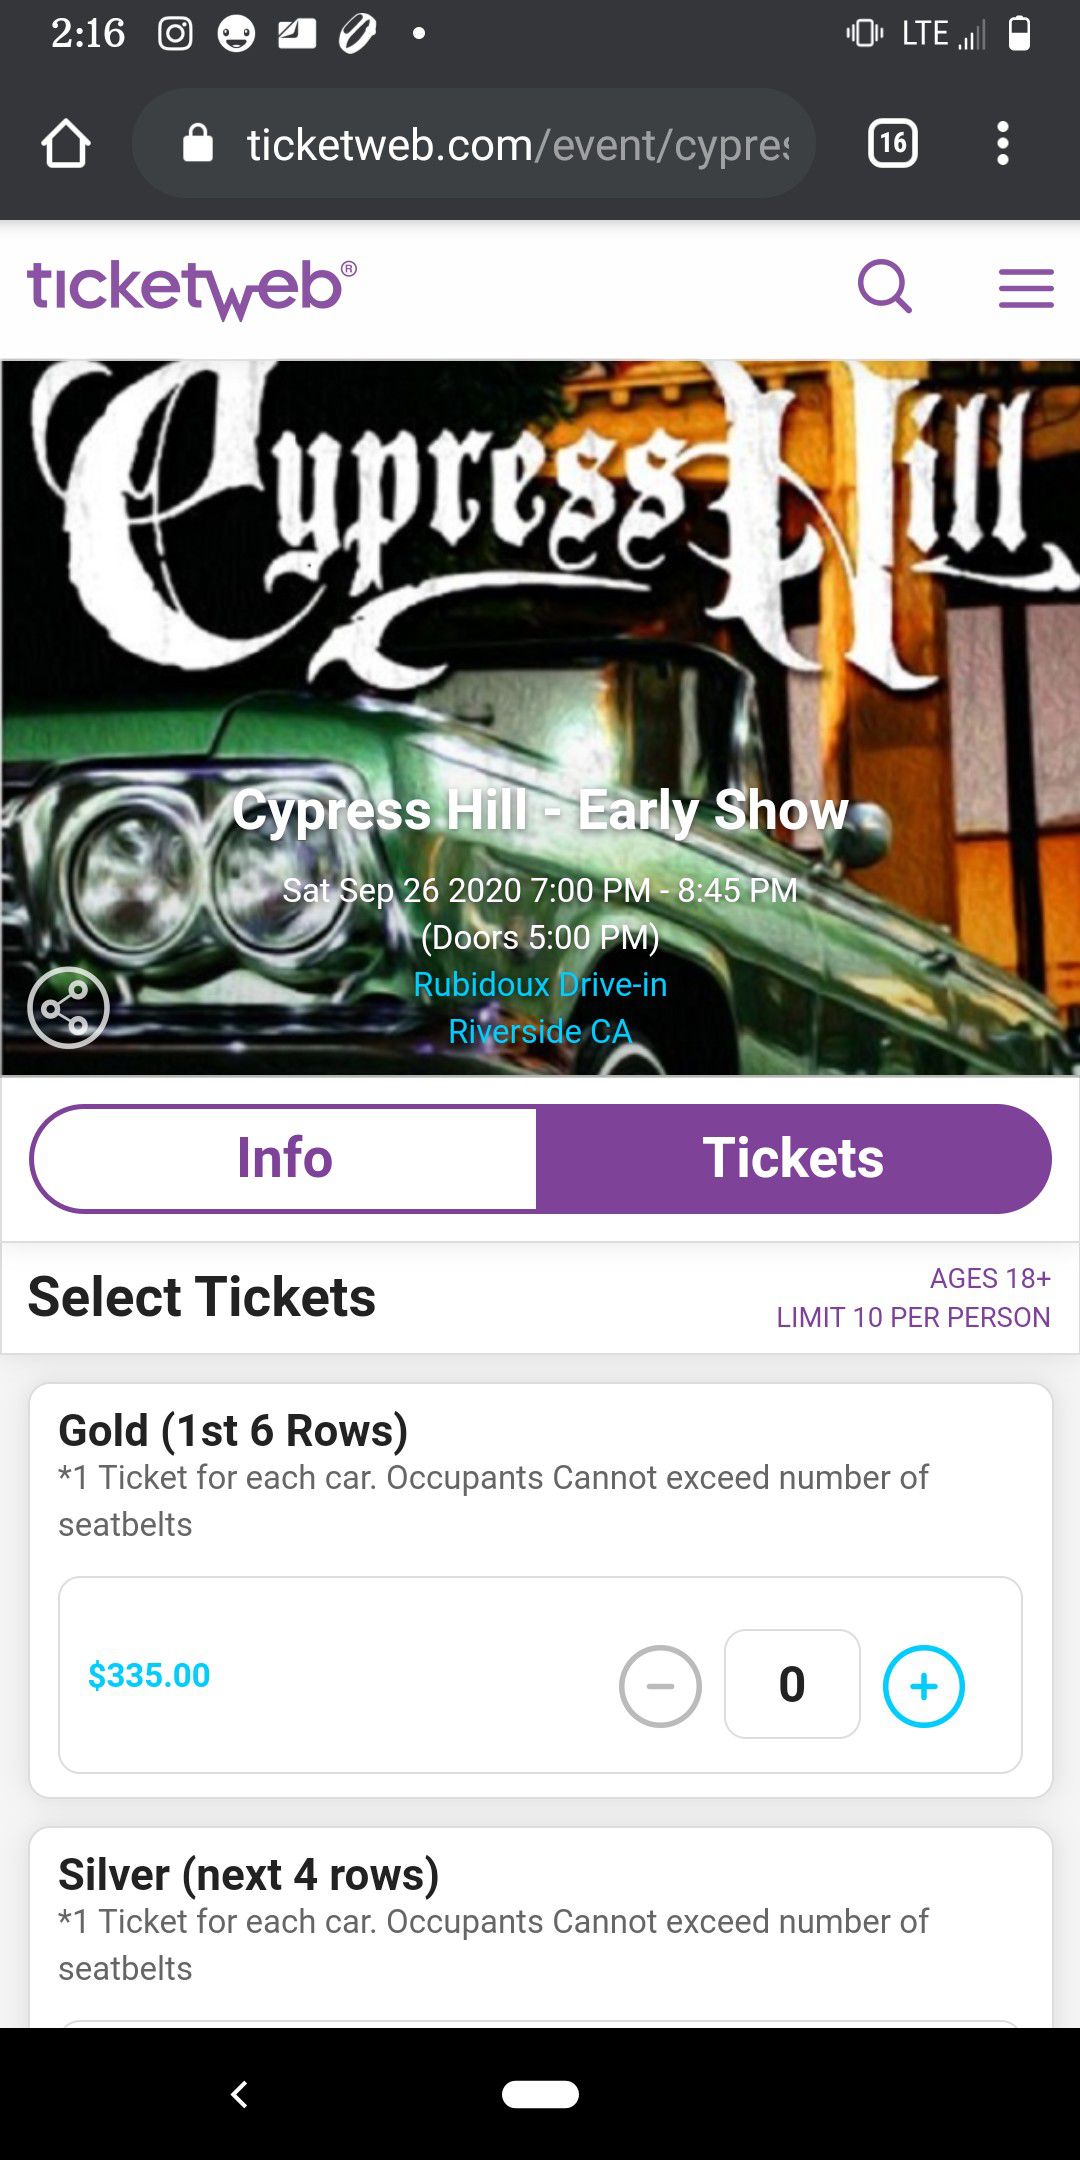 Cypress Hill - Early Show at Rubidoux Drive-in Silver Ticket